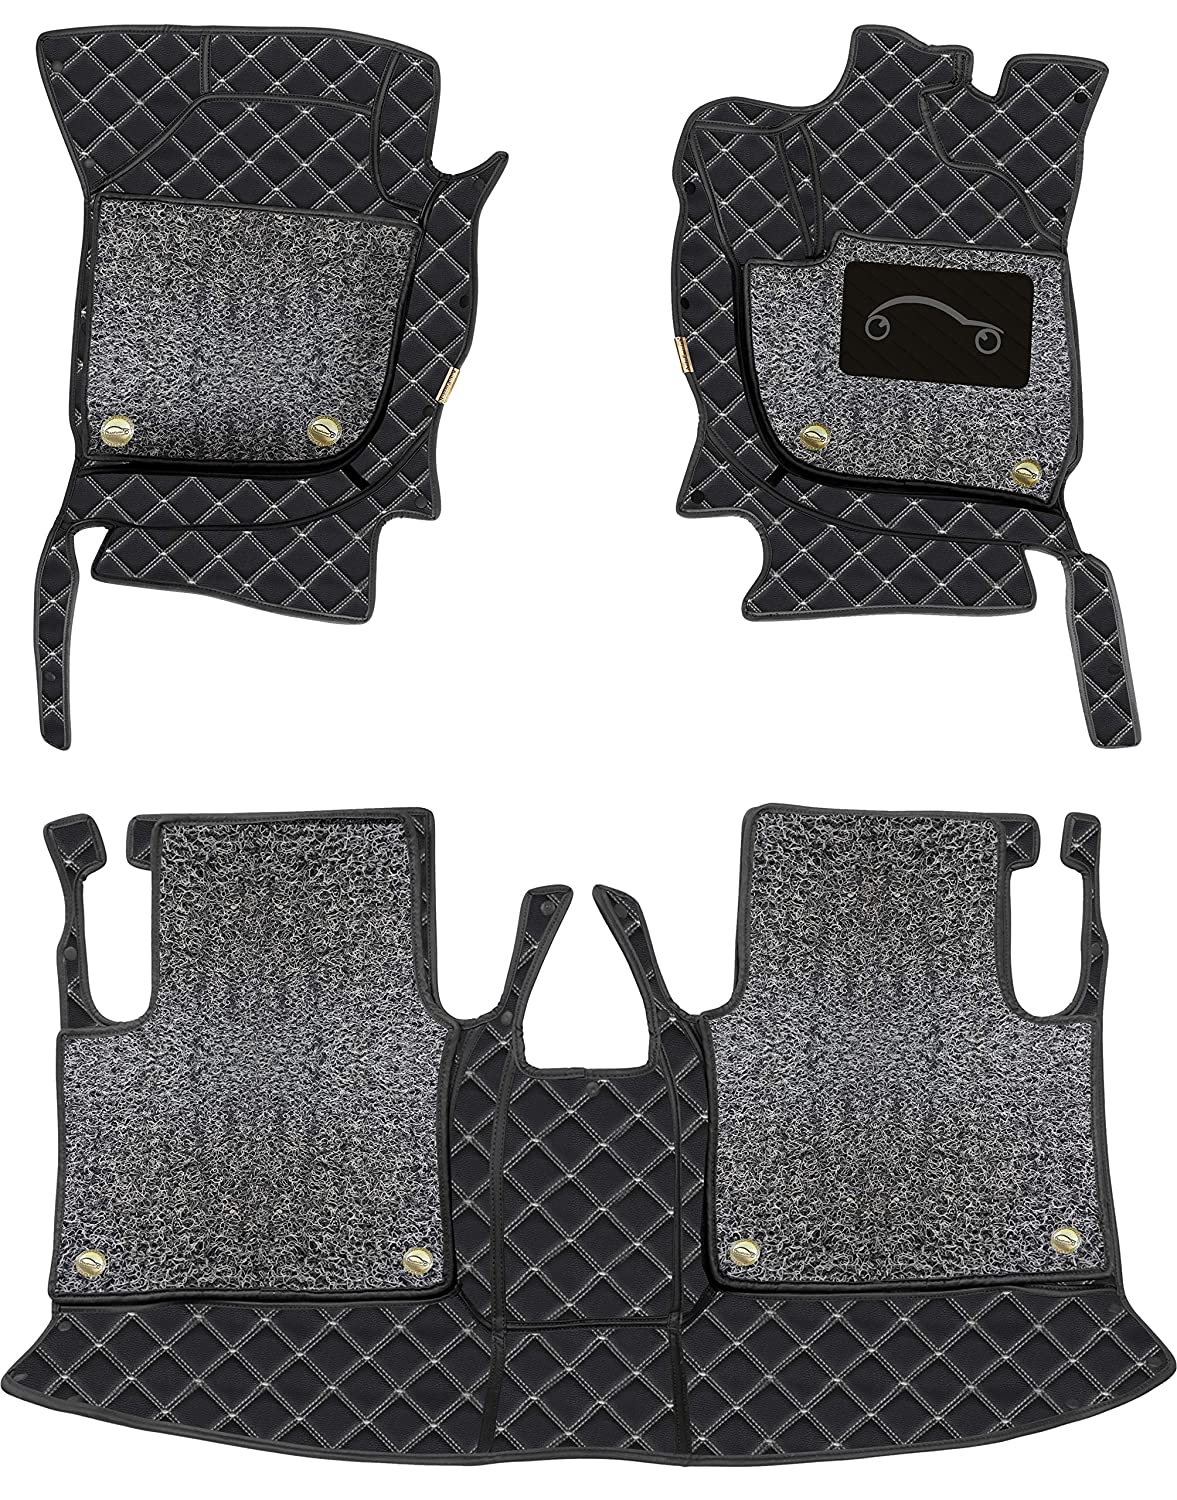 MG Gloster (6 Seater) 2020 7D Luxury Car Mat, All Weather Proof, Anti-Skid, 100% Waterproof & Odorless with Unique Diamond Fish Design (24mm Luxury PU Leather, 2 Rows)